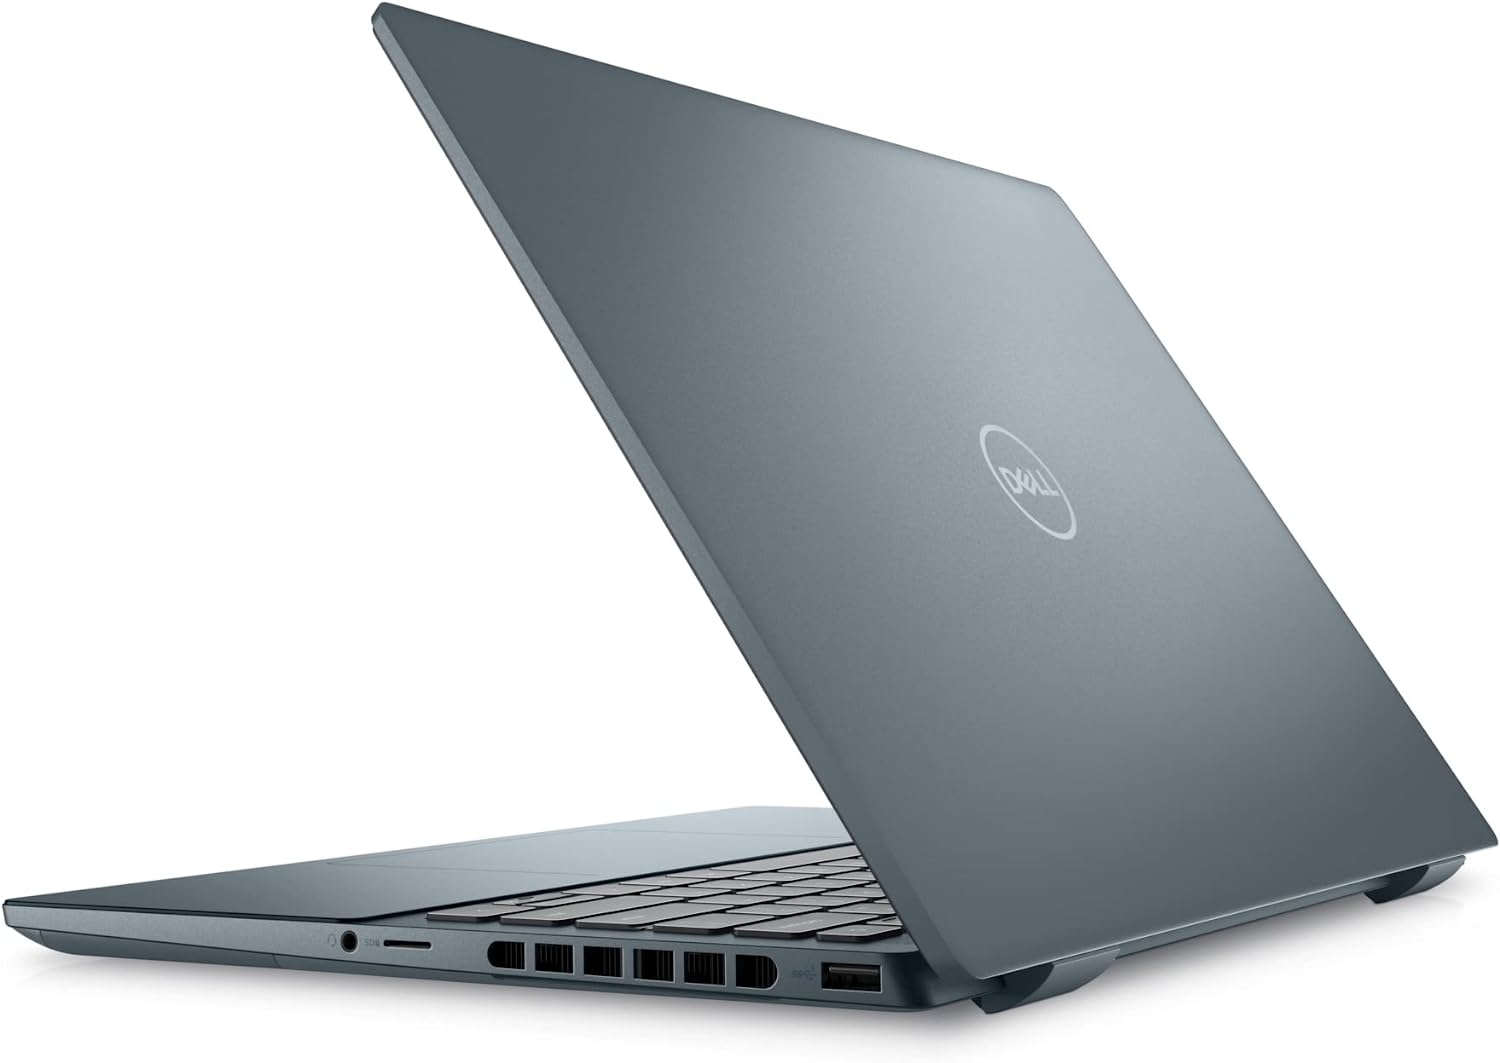 This image shows the Dell Inspiron 14 Plus 7420.